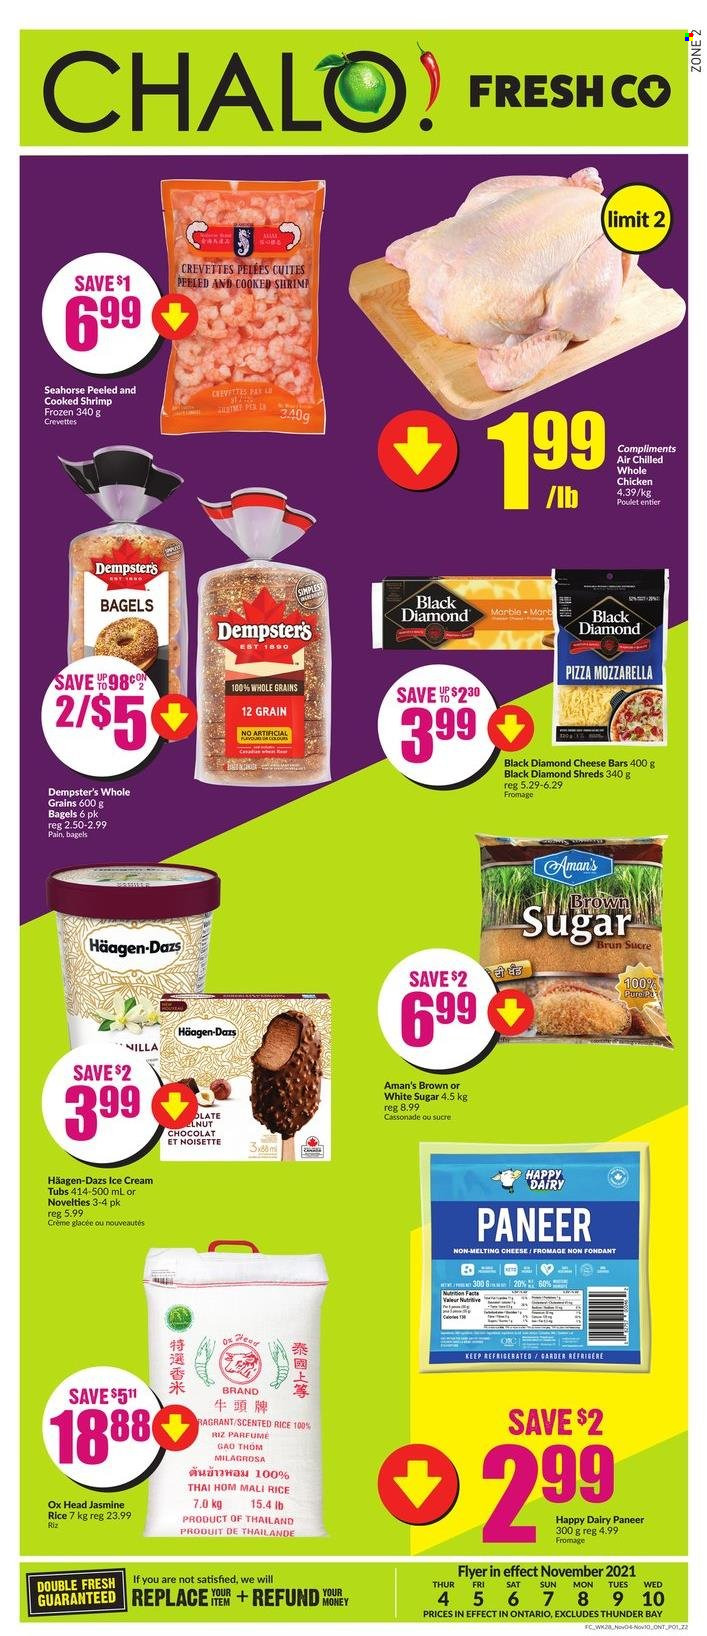 thumbnail - Chalo! FreshCo. Flyer - November 04, 2021 - November 10, 2021 - Sales products - bagels, shrimps, pizza, paneer, ice cream, Häagen-Dazs, sugar, rice, whole chicken, chicken. Page 1.